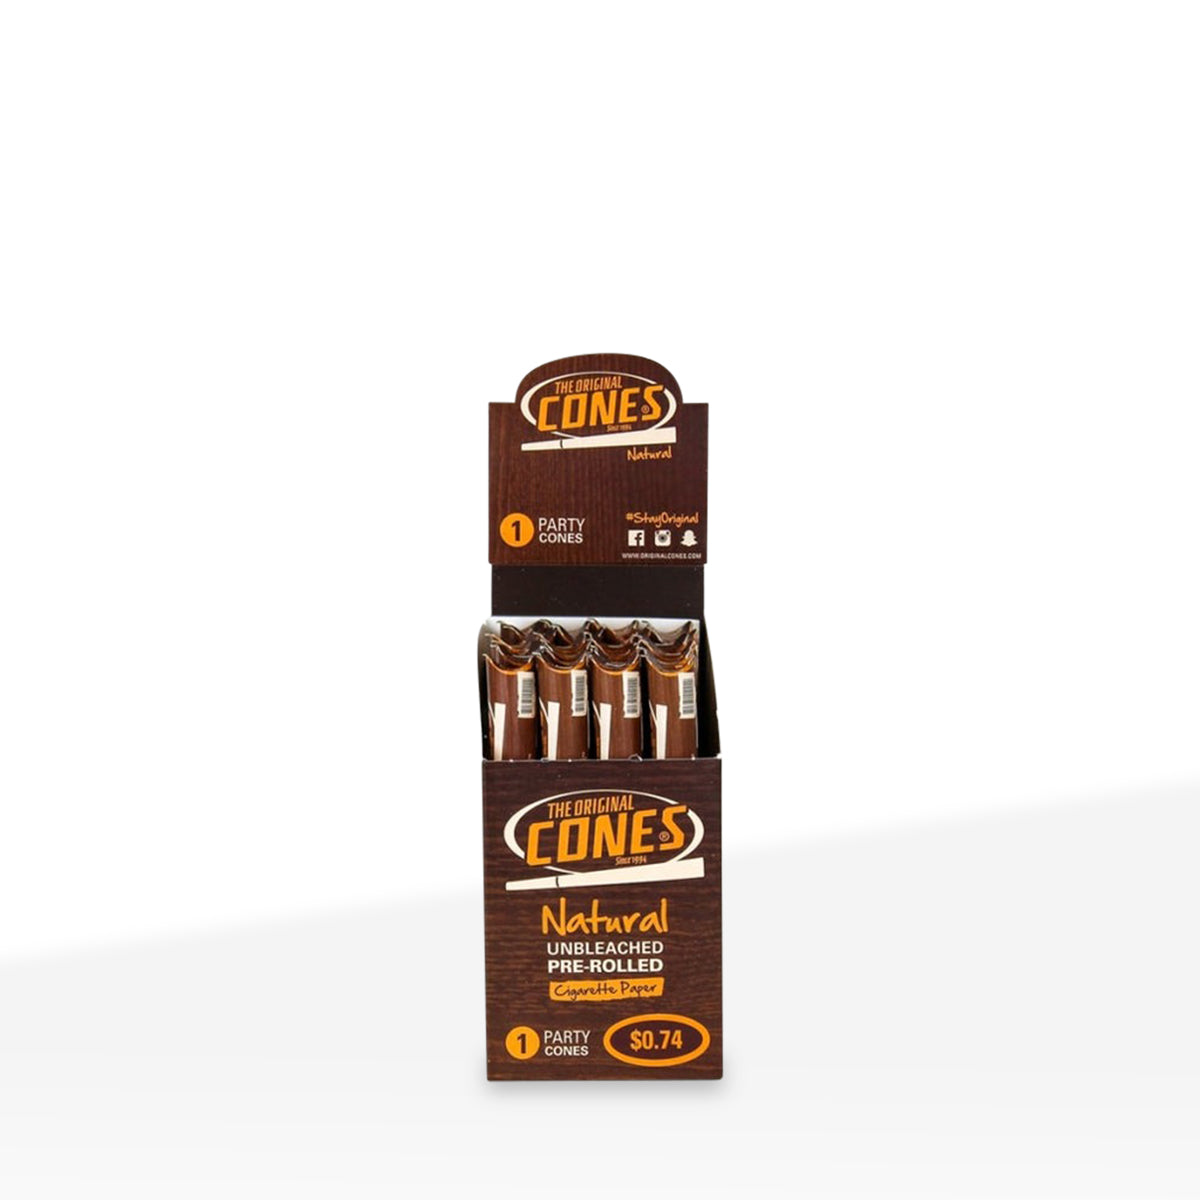 The Original Cones | Natural Pre-Rolled Cones Party Size | 140mm - Unbleached Brown - 24 Count